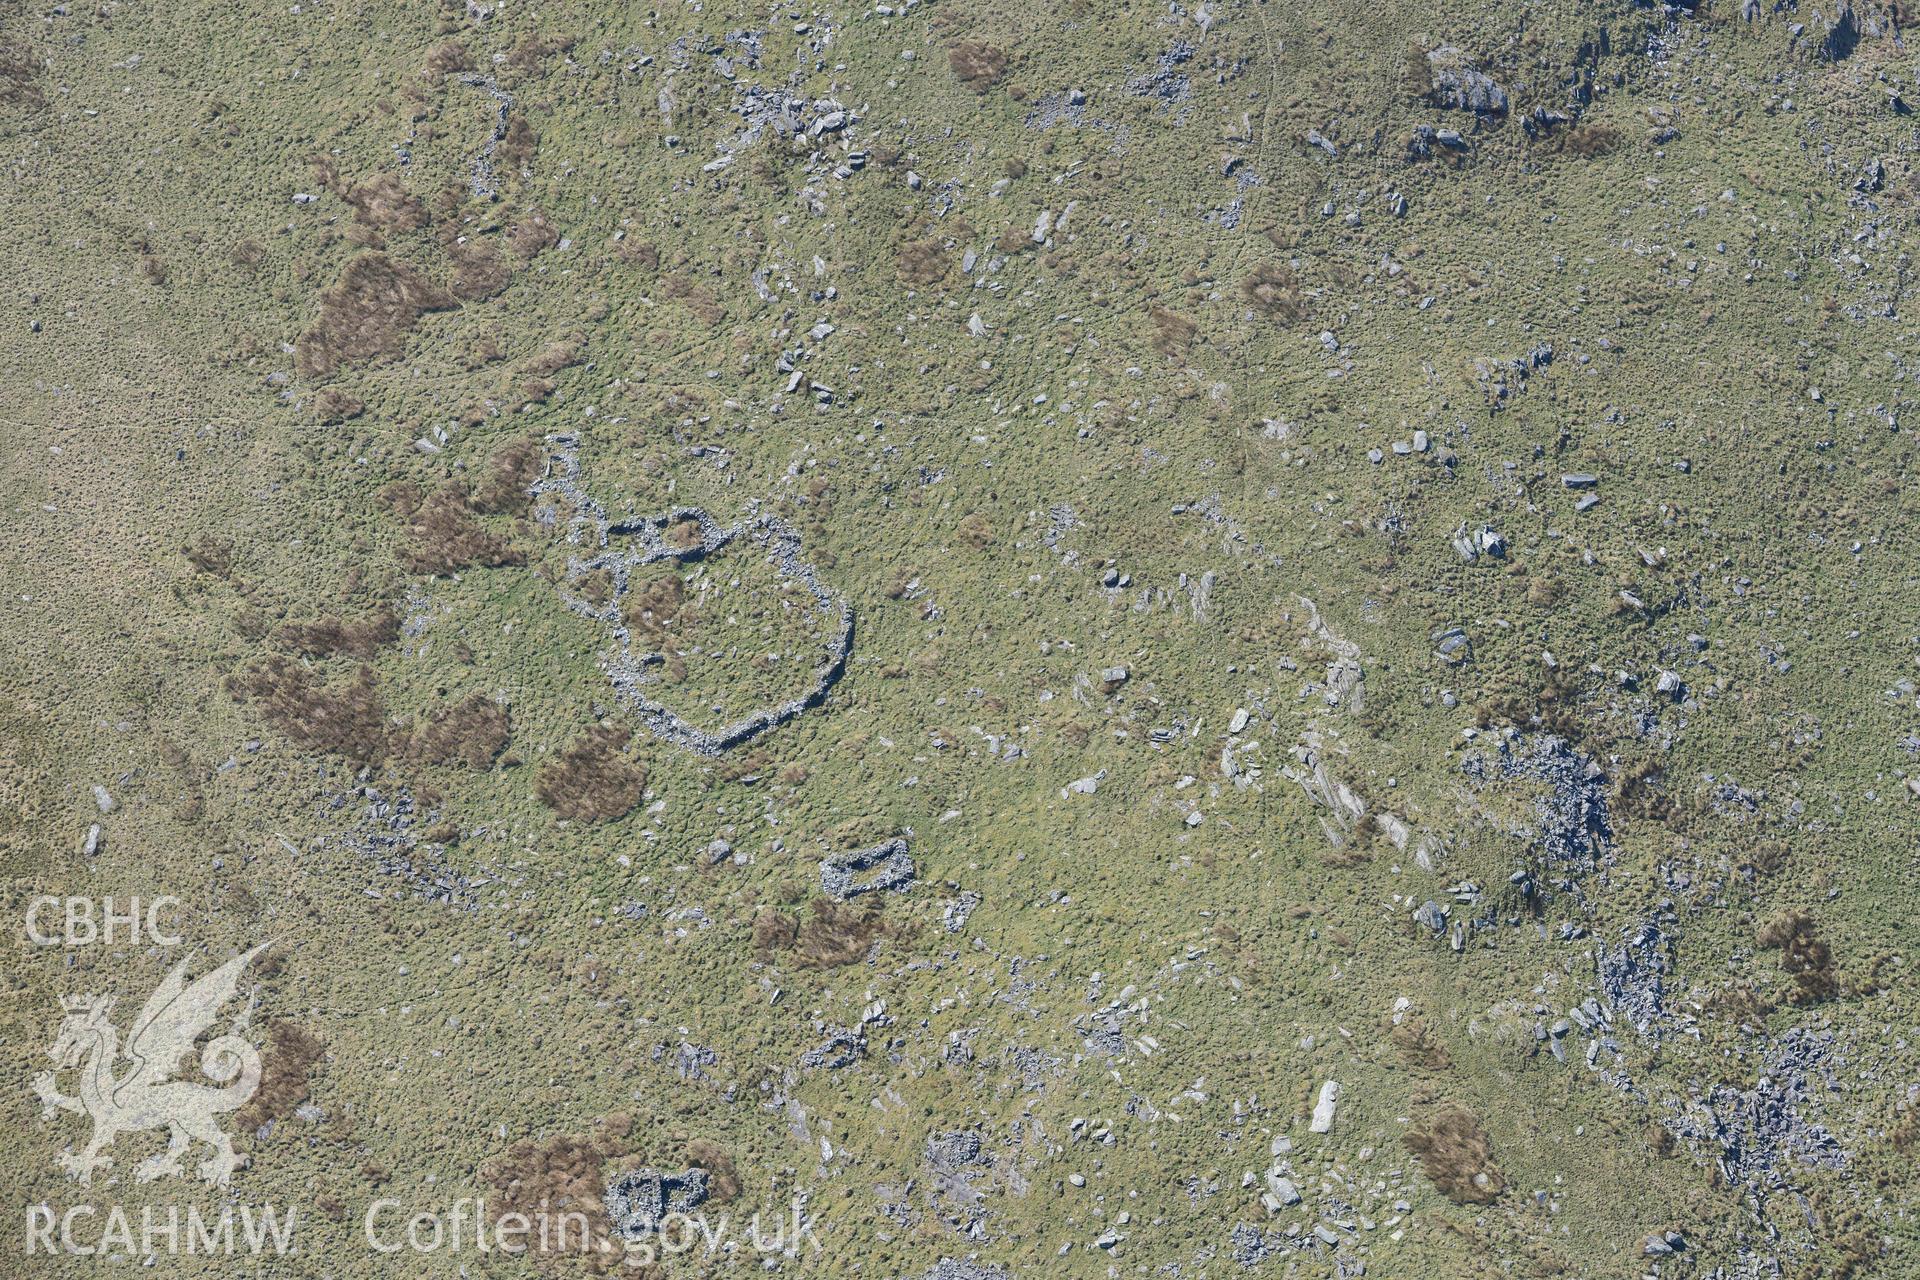 Craig y Dinas Hillfort, settlement and longhuts. Oblique aerial photographs taken during the Royal Commission’s programme of archaeological aerial reconnaissance by Toby Driver on 25 March 2022.